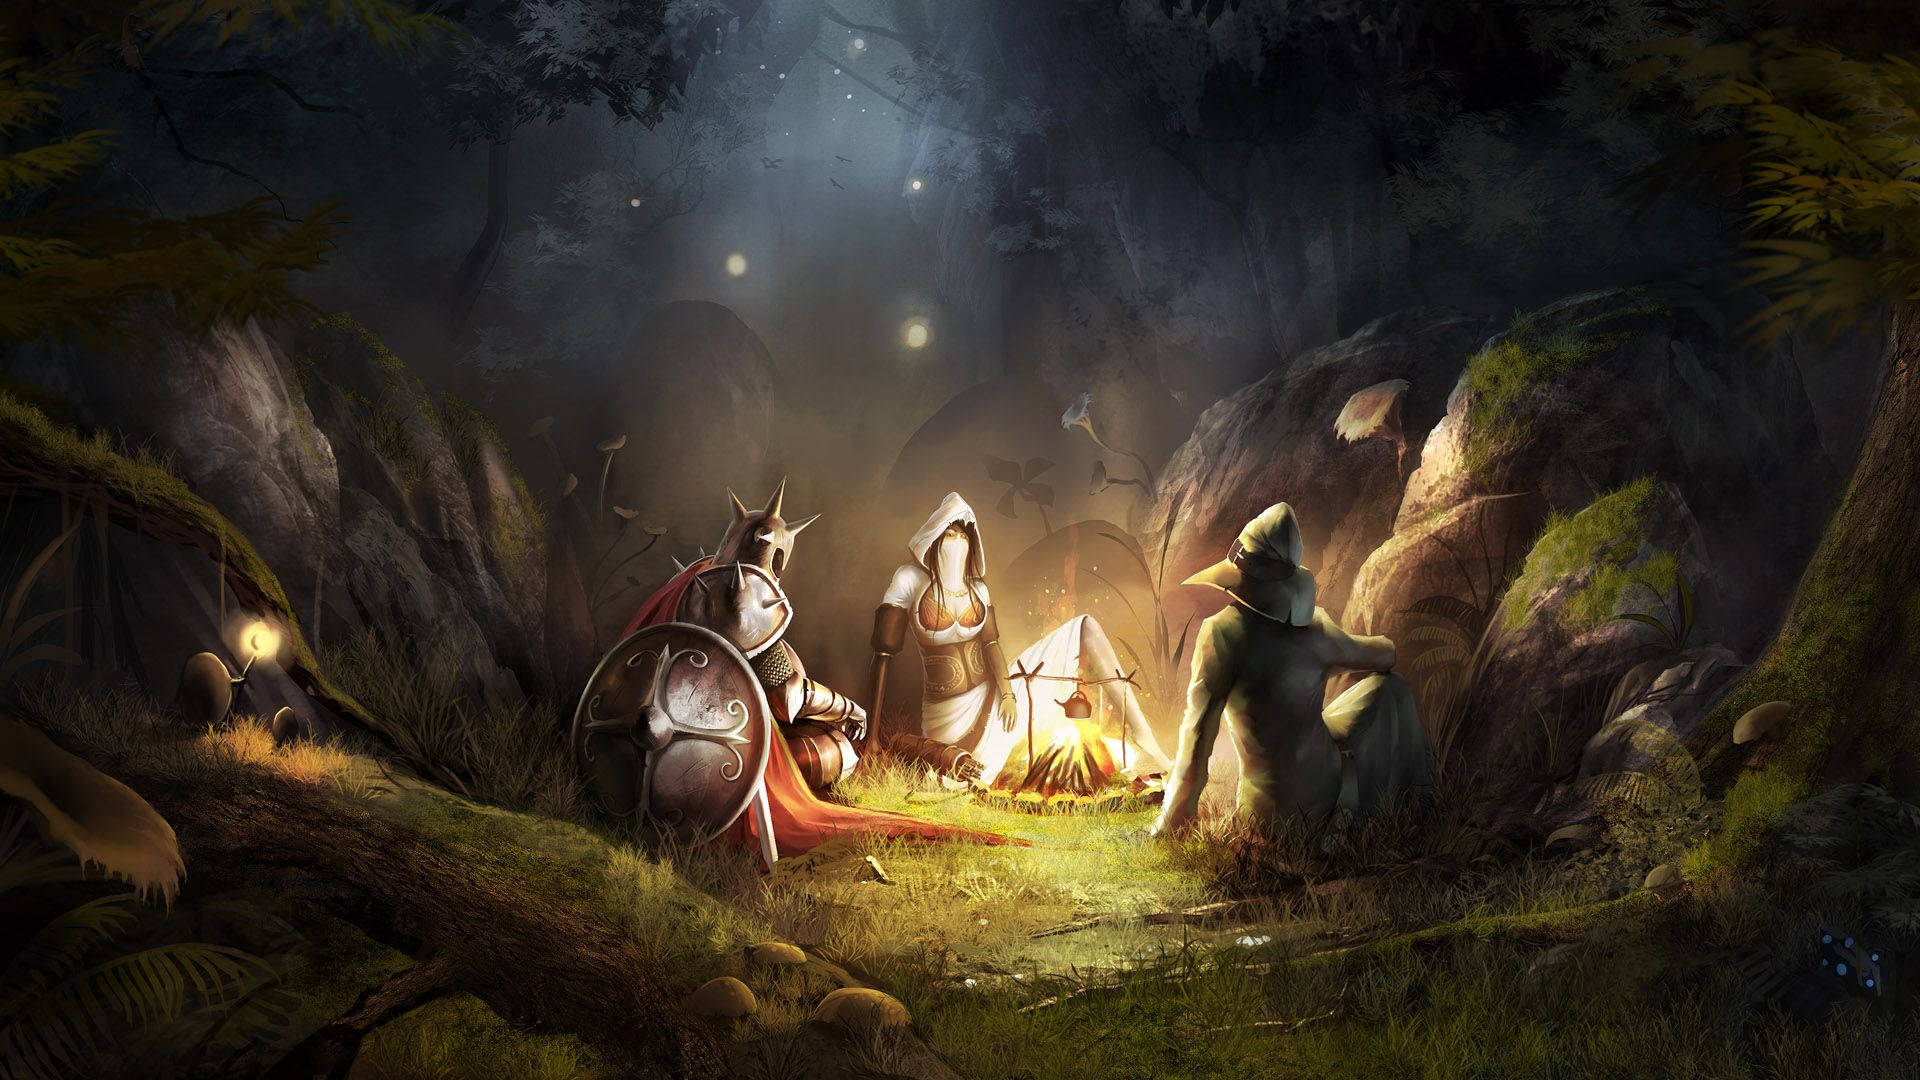 The Heroes of Dungeons and Dragons Prepare to Rest After a Long Day of Adventure Wallpaper